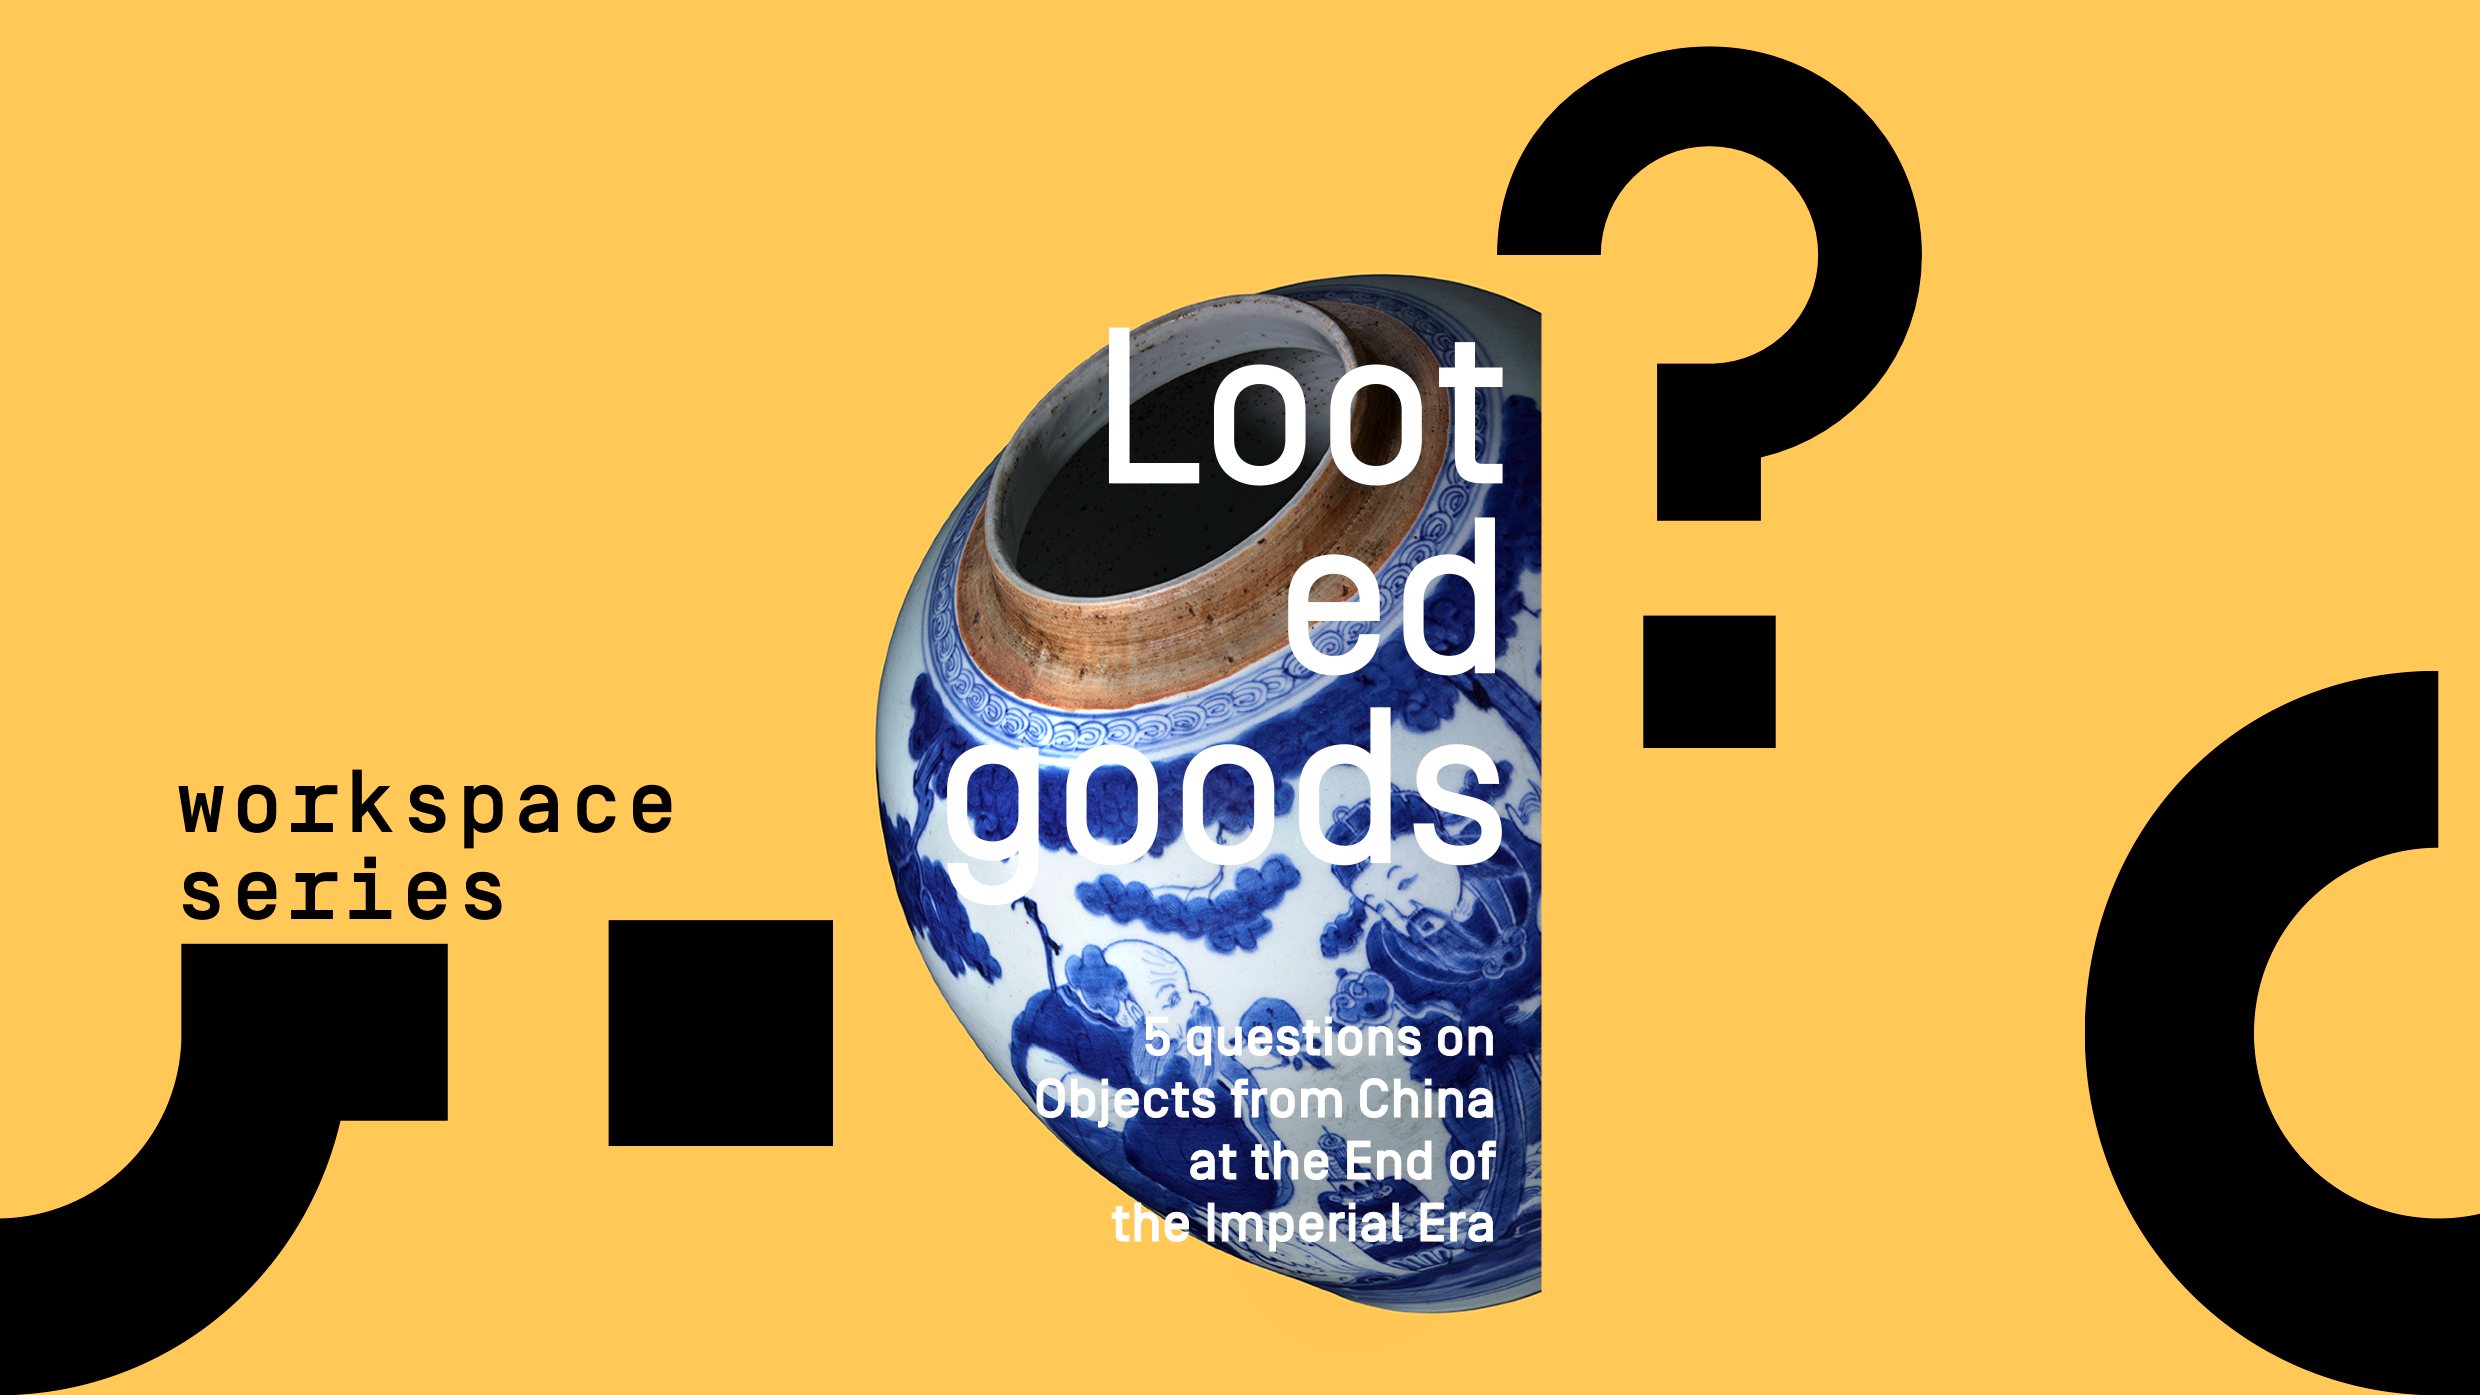 Looted Goods